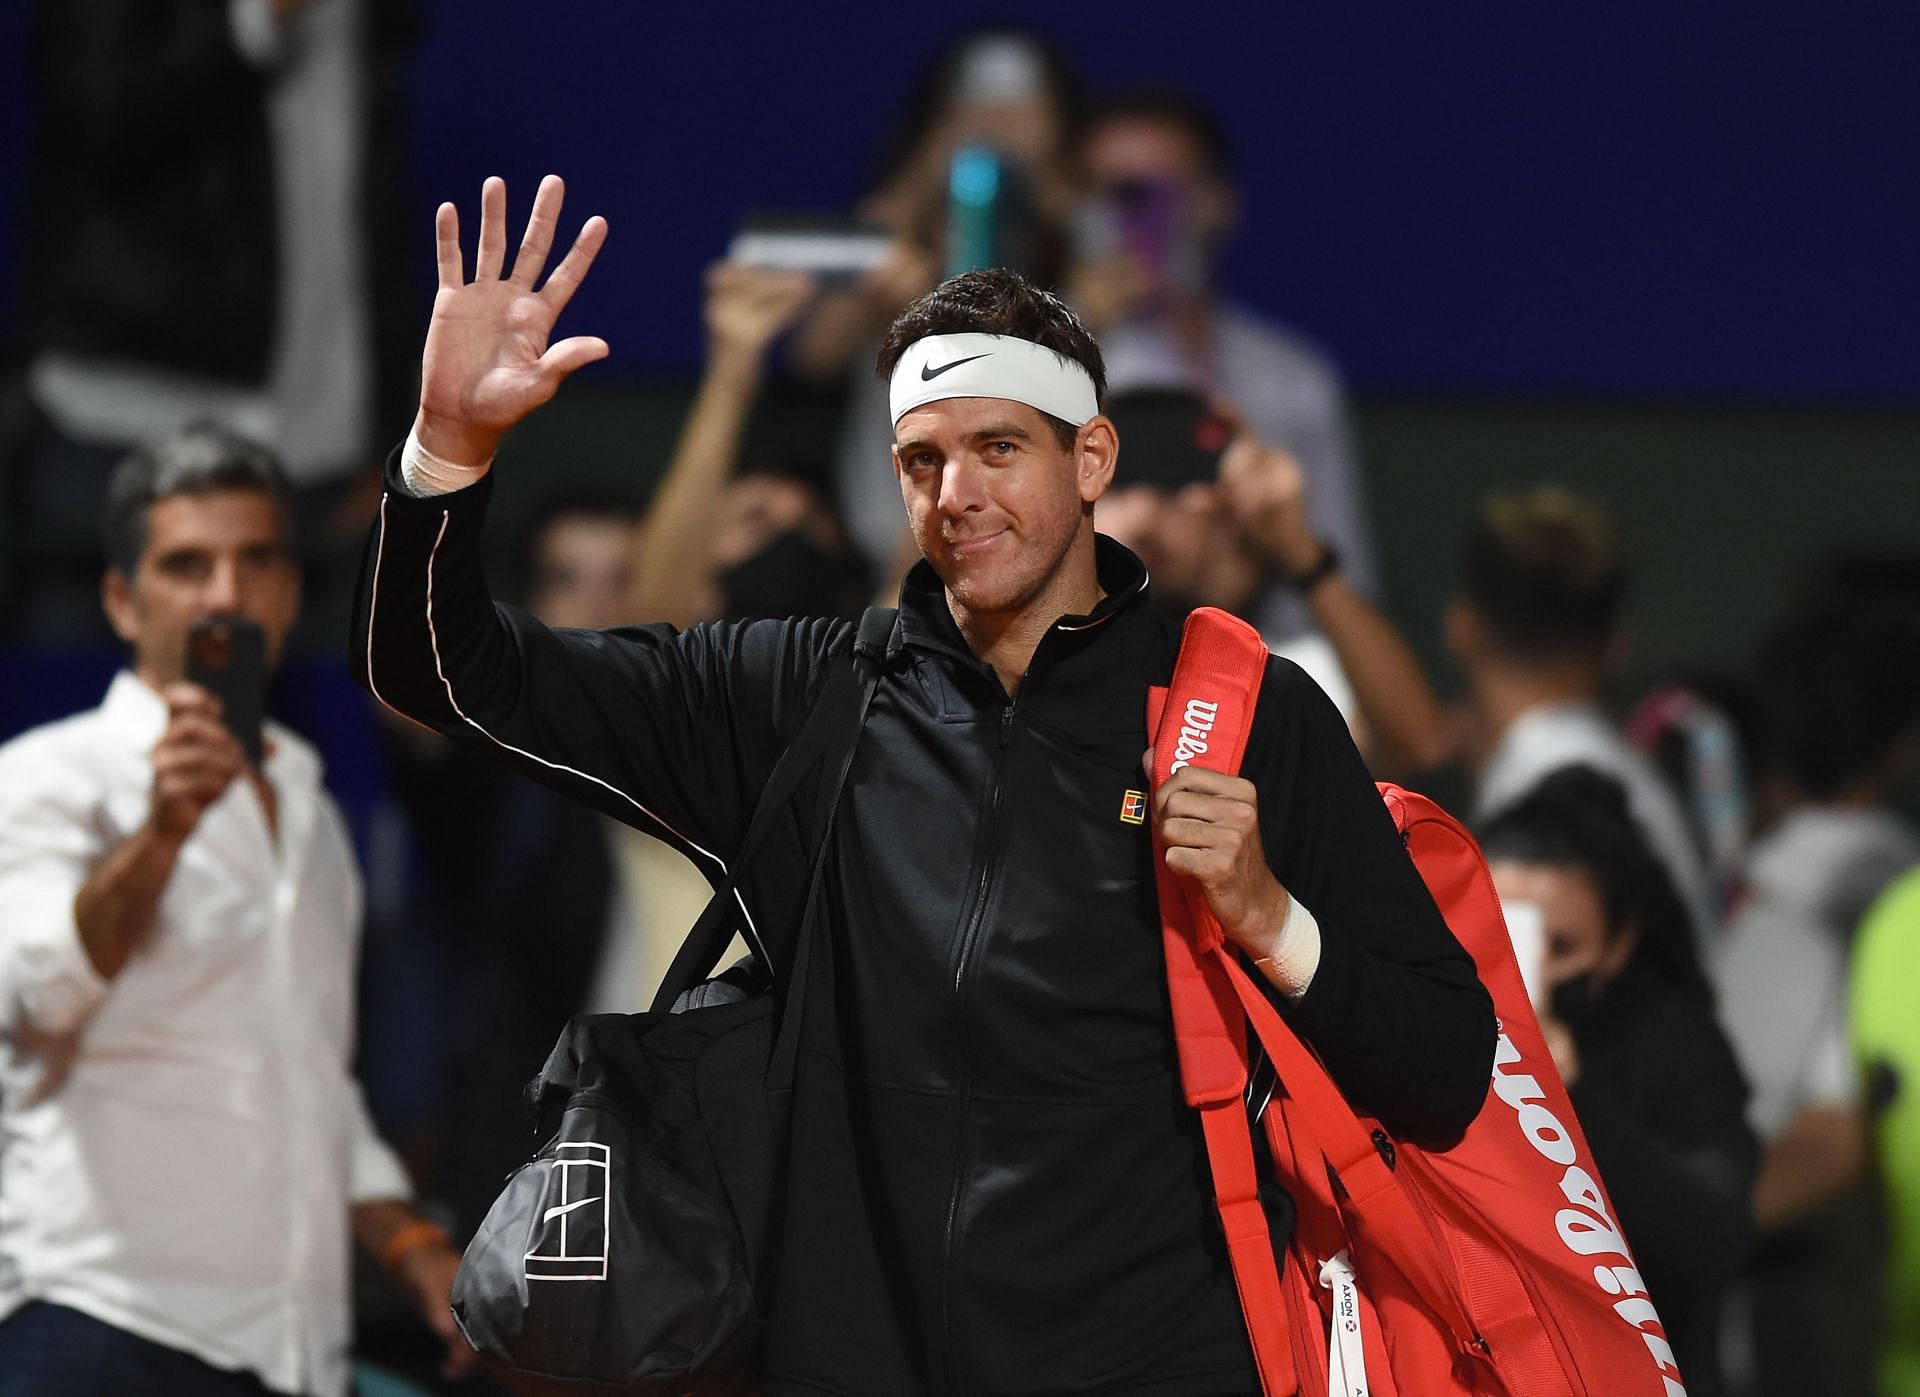 Juan Martin del Potro received the farewell he deserved from his home crowd in Buenos Aires